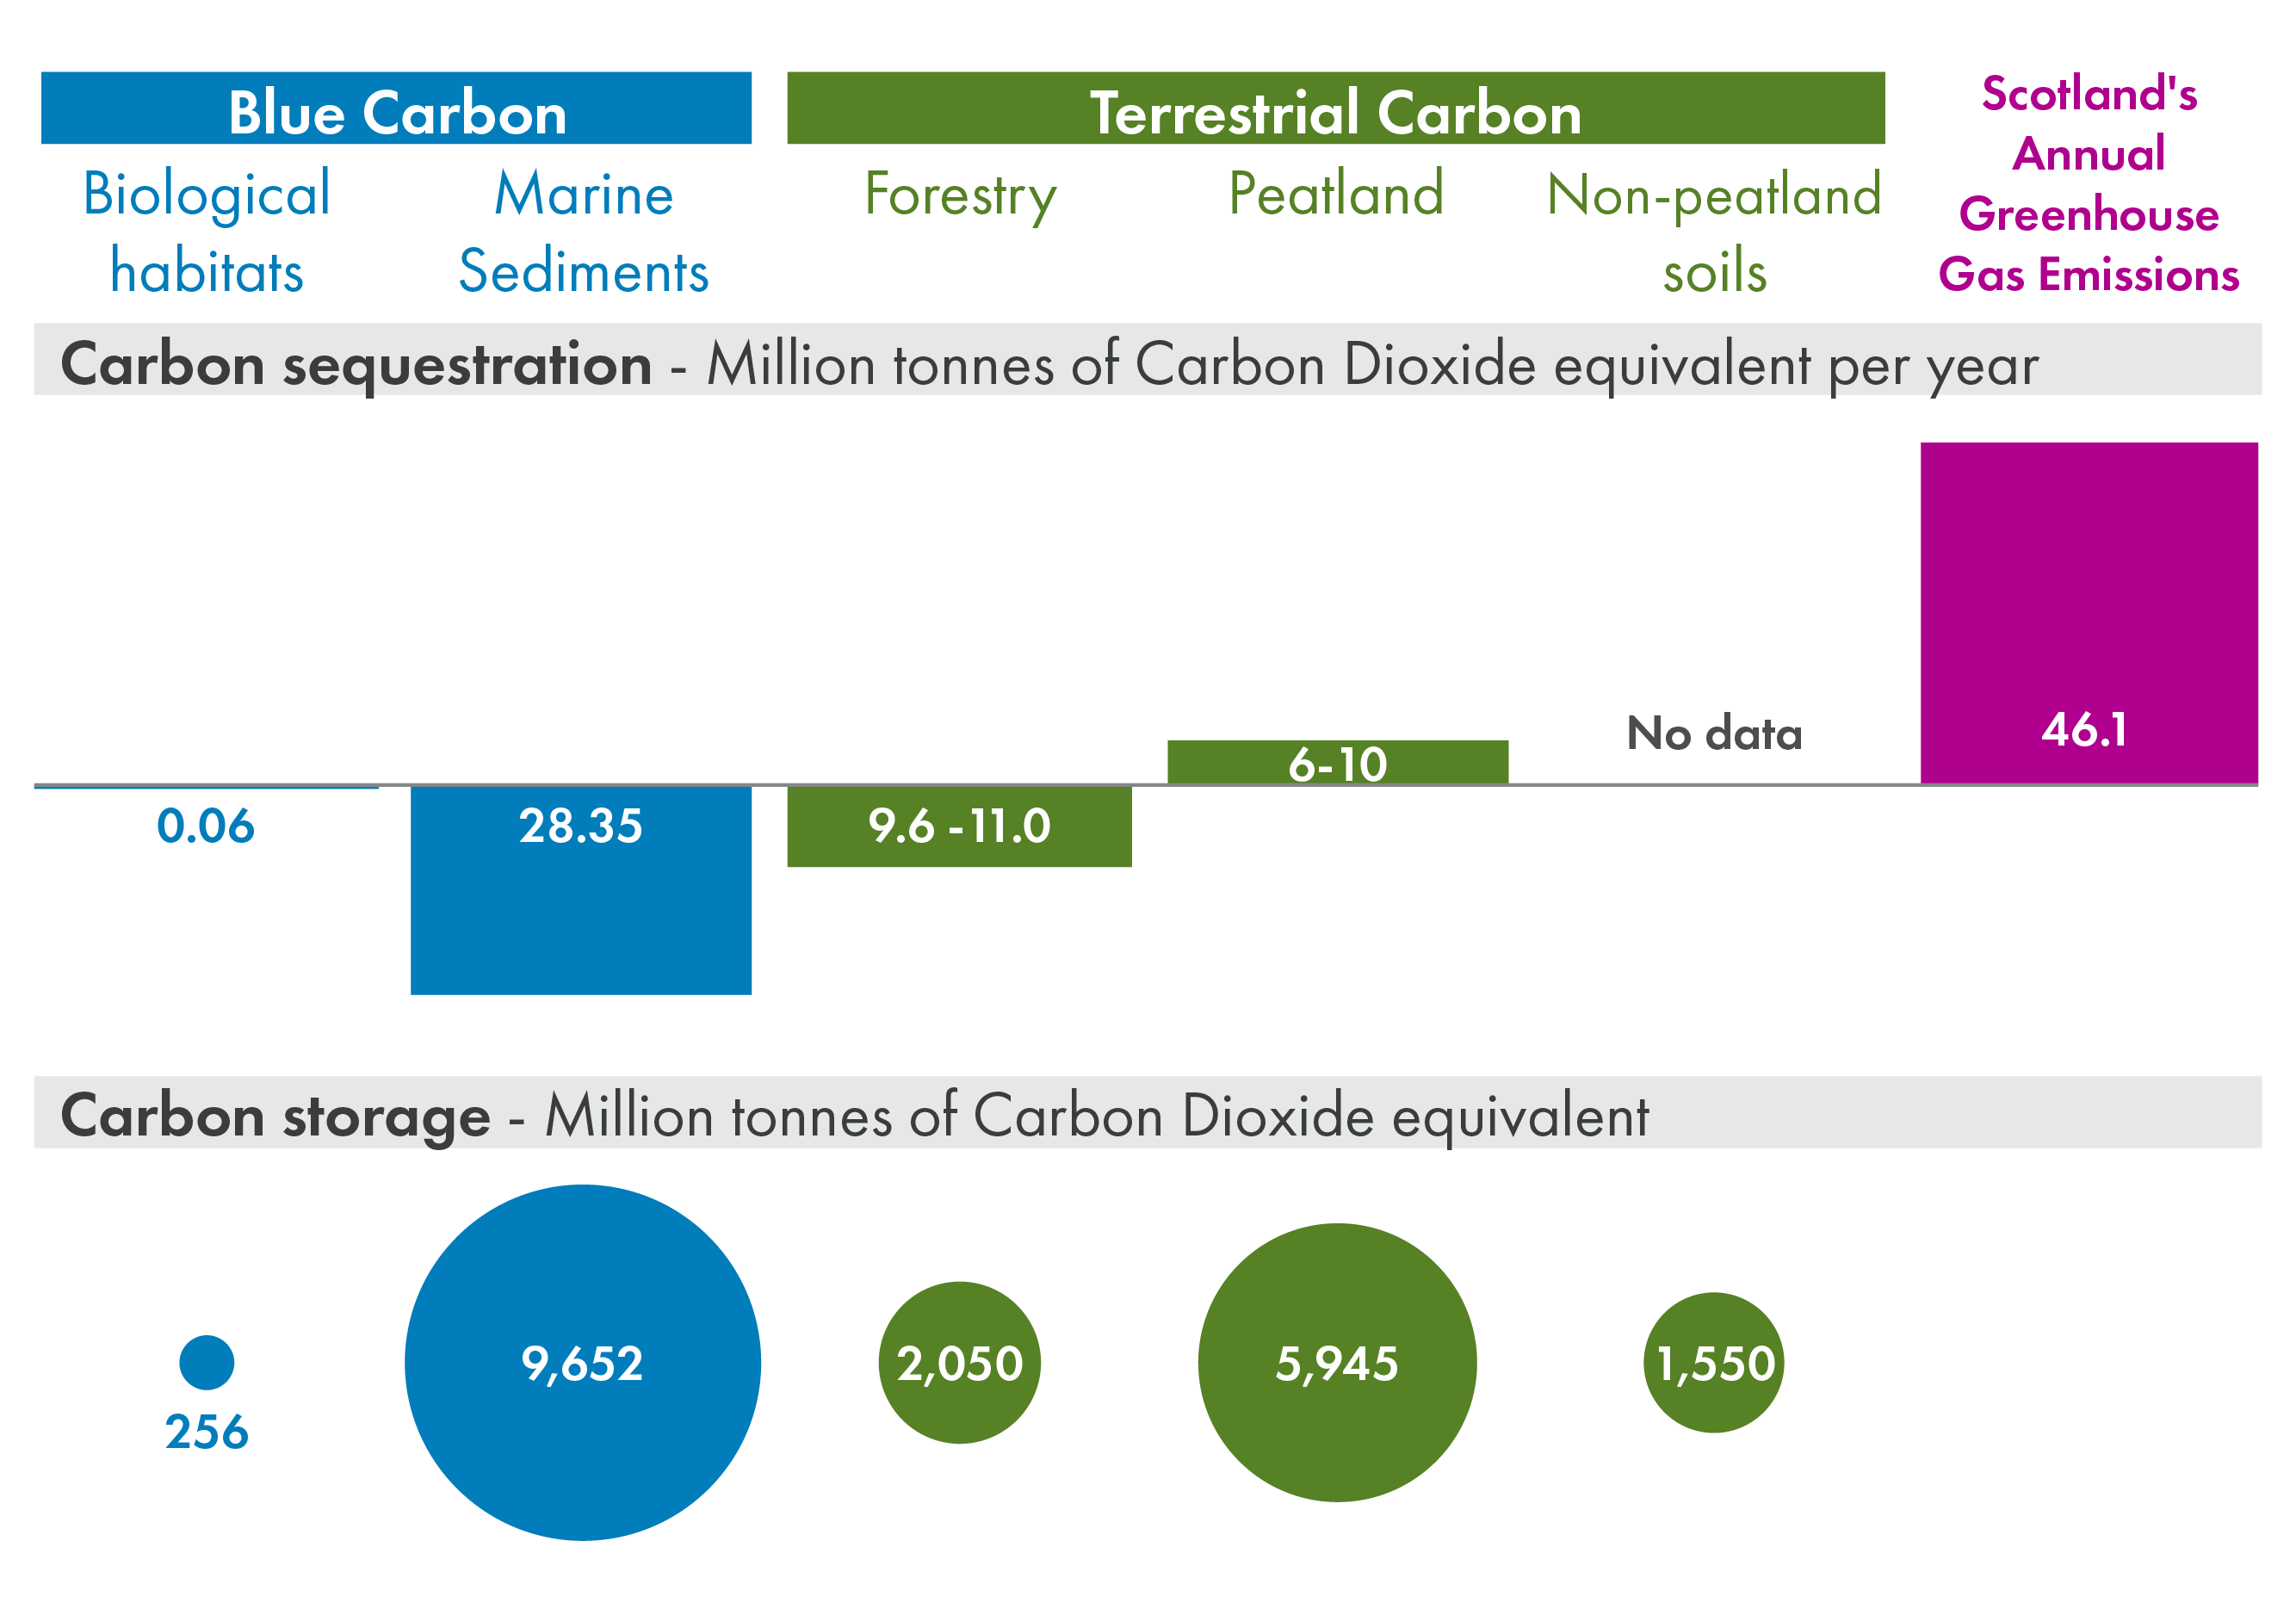 Infographic showing the carbon stored and annually sequestered (in megatonnes of carbon dioxide equivalent per year) in Scotland's blue carbon, split into biological habitats and marine sediments, and Scotland's terrestrial carbon, split into forestry, peatland and non-peatland soils. This is shown alongside Scotland's annual greenhouse gas emissions. Scotland’s blue carbon environments store 9,636 megatonnes of carbon dioxide equivalent, which exceeds the carbon stored in Scotland’s land-based ecosystems megatonnes of carbon dioxide